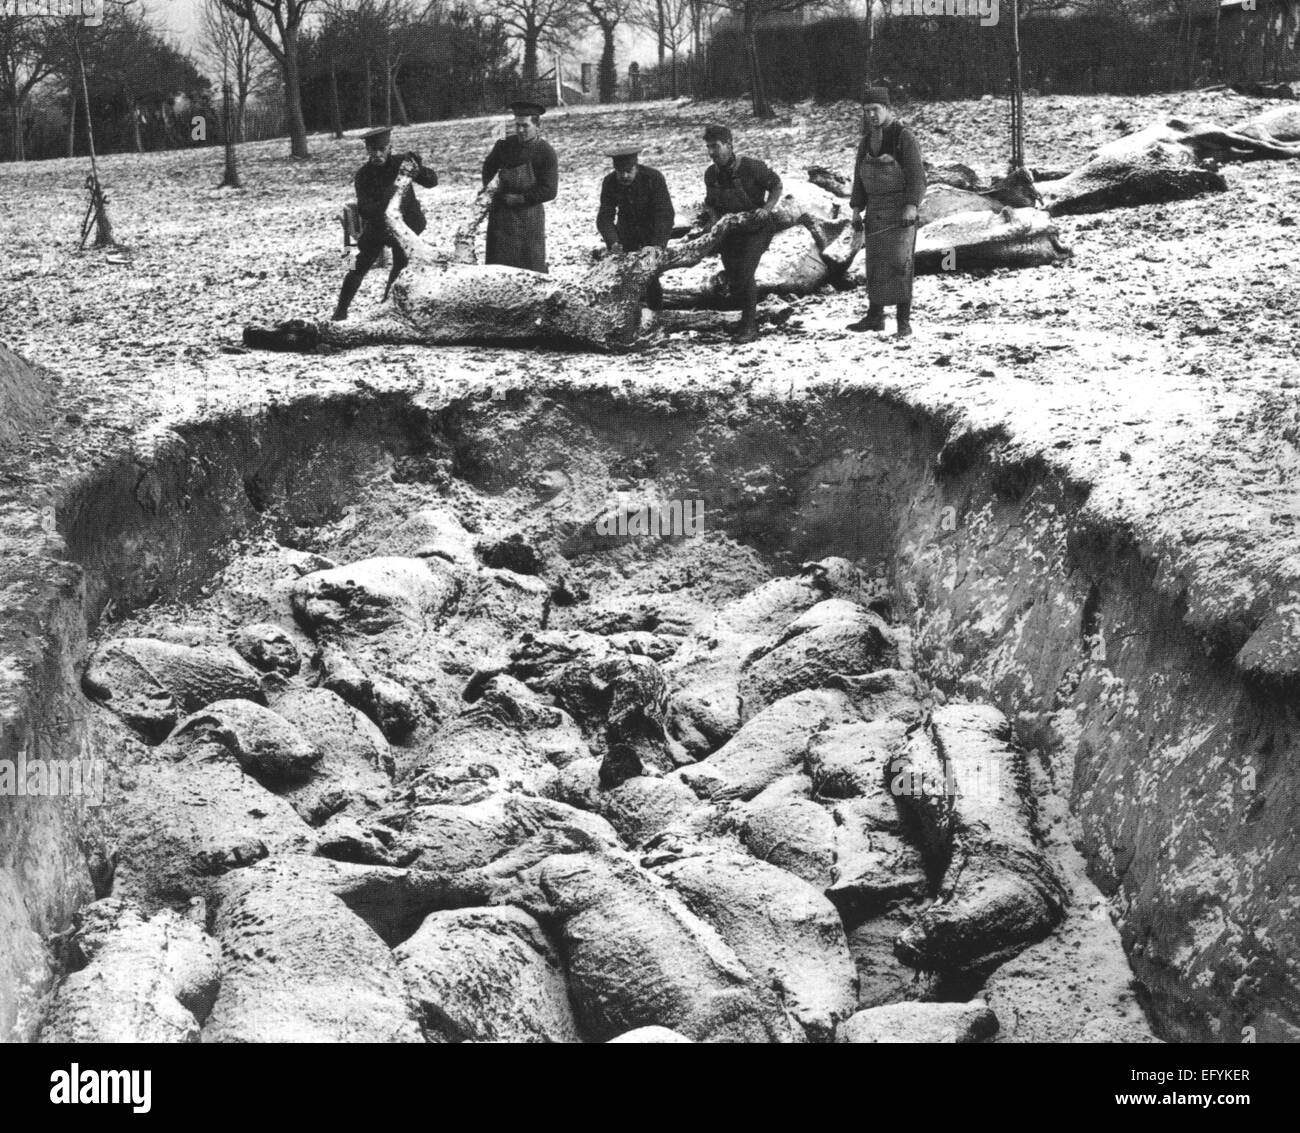 FIRST WORLD WAR  Mass burial of horses in winter 1916 by British soldiers. Location unknown. Photo British Official Stock Photo